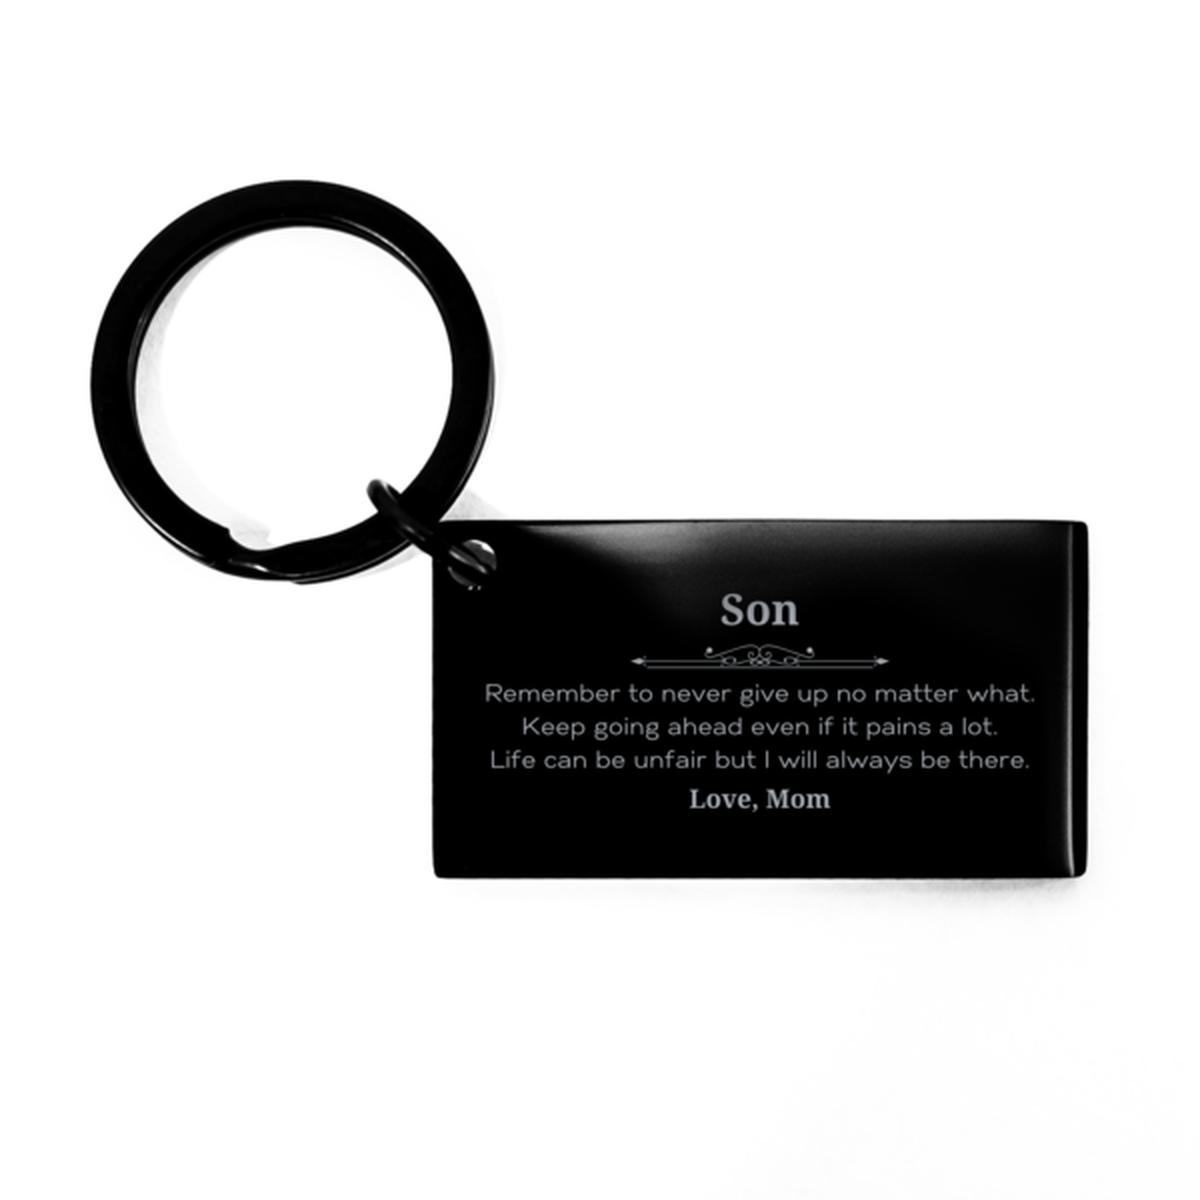 Son Motivational Gifts from Mom, Remember to never give up no matter what, Inspirational Birthday Keychain for Son